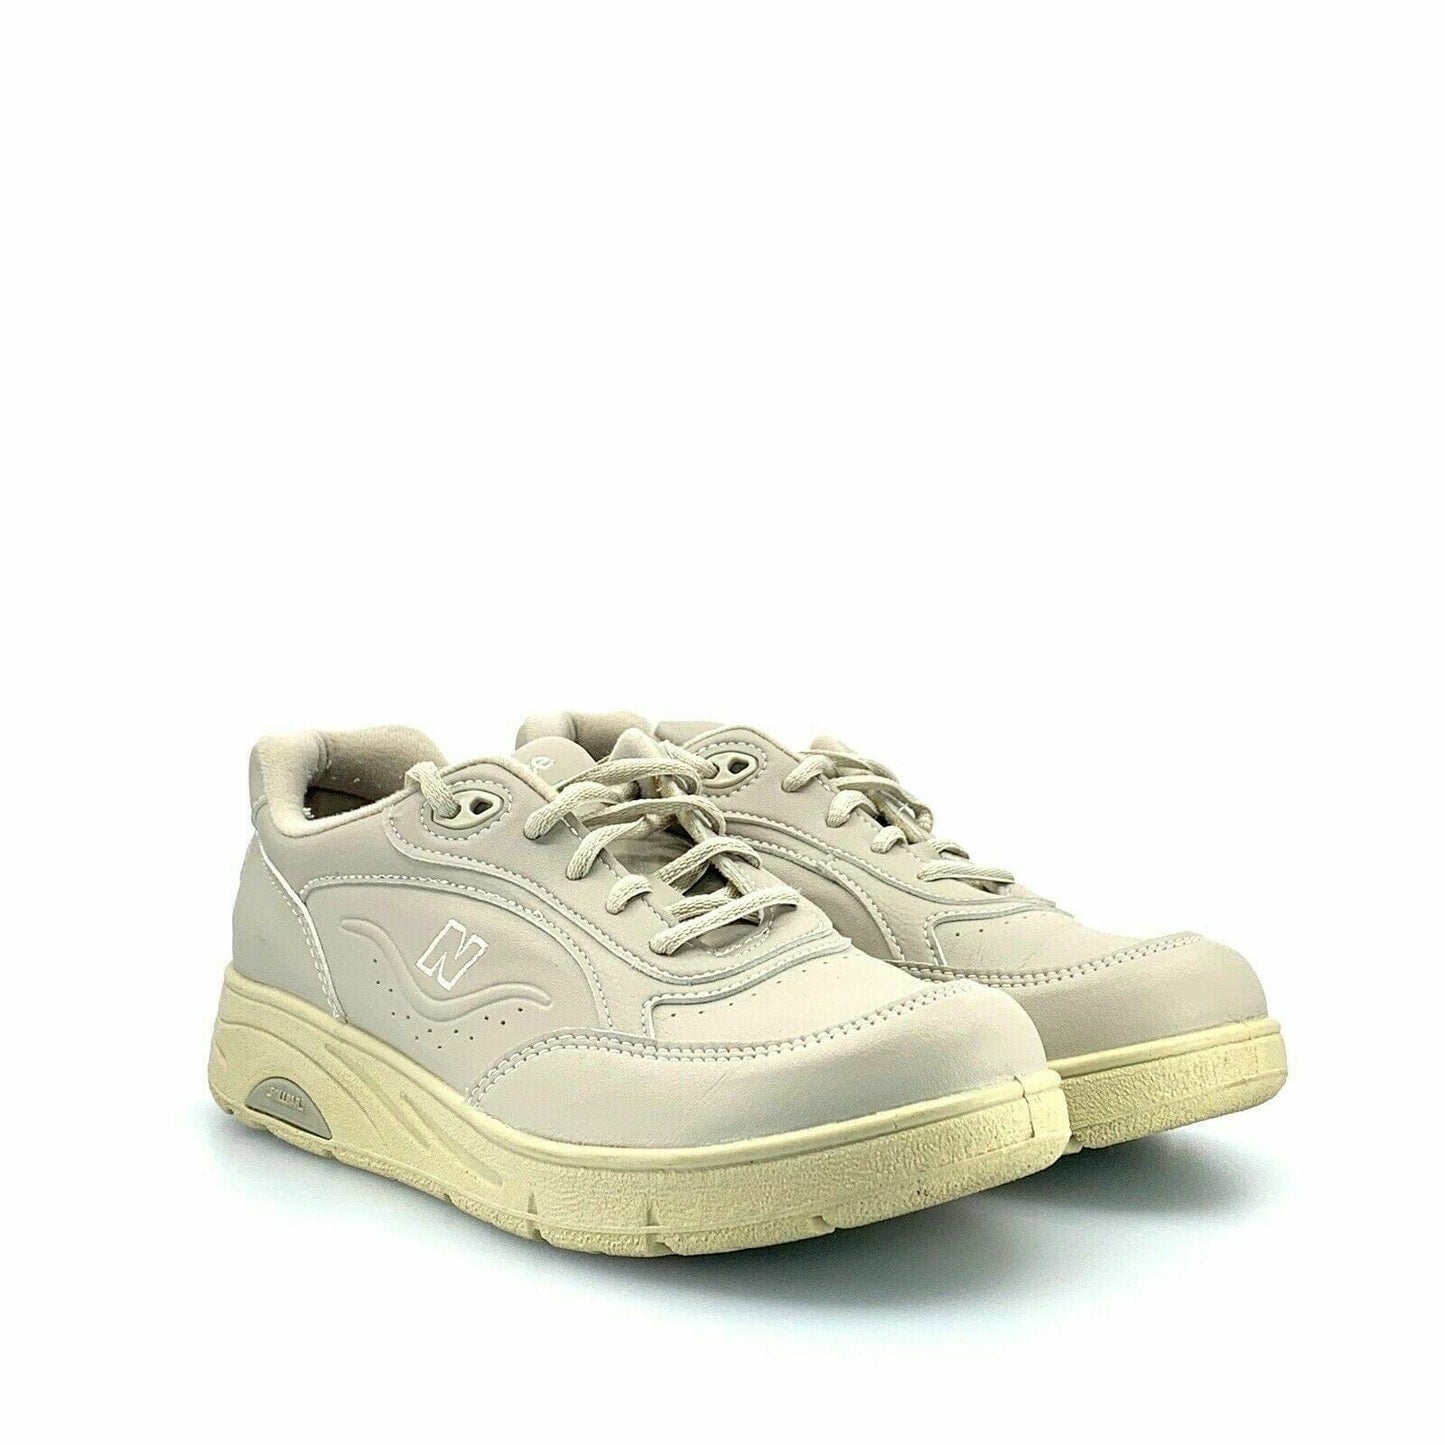 New Balance Womens 811 Rollbar Sneakers Shoes Beige Lace Up Size 6.5 B WW811BE - parsimonyshoppes